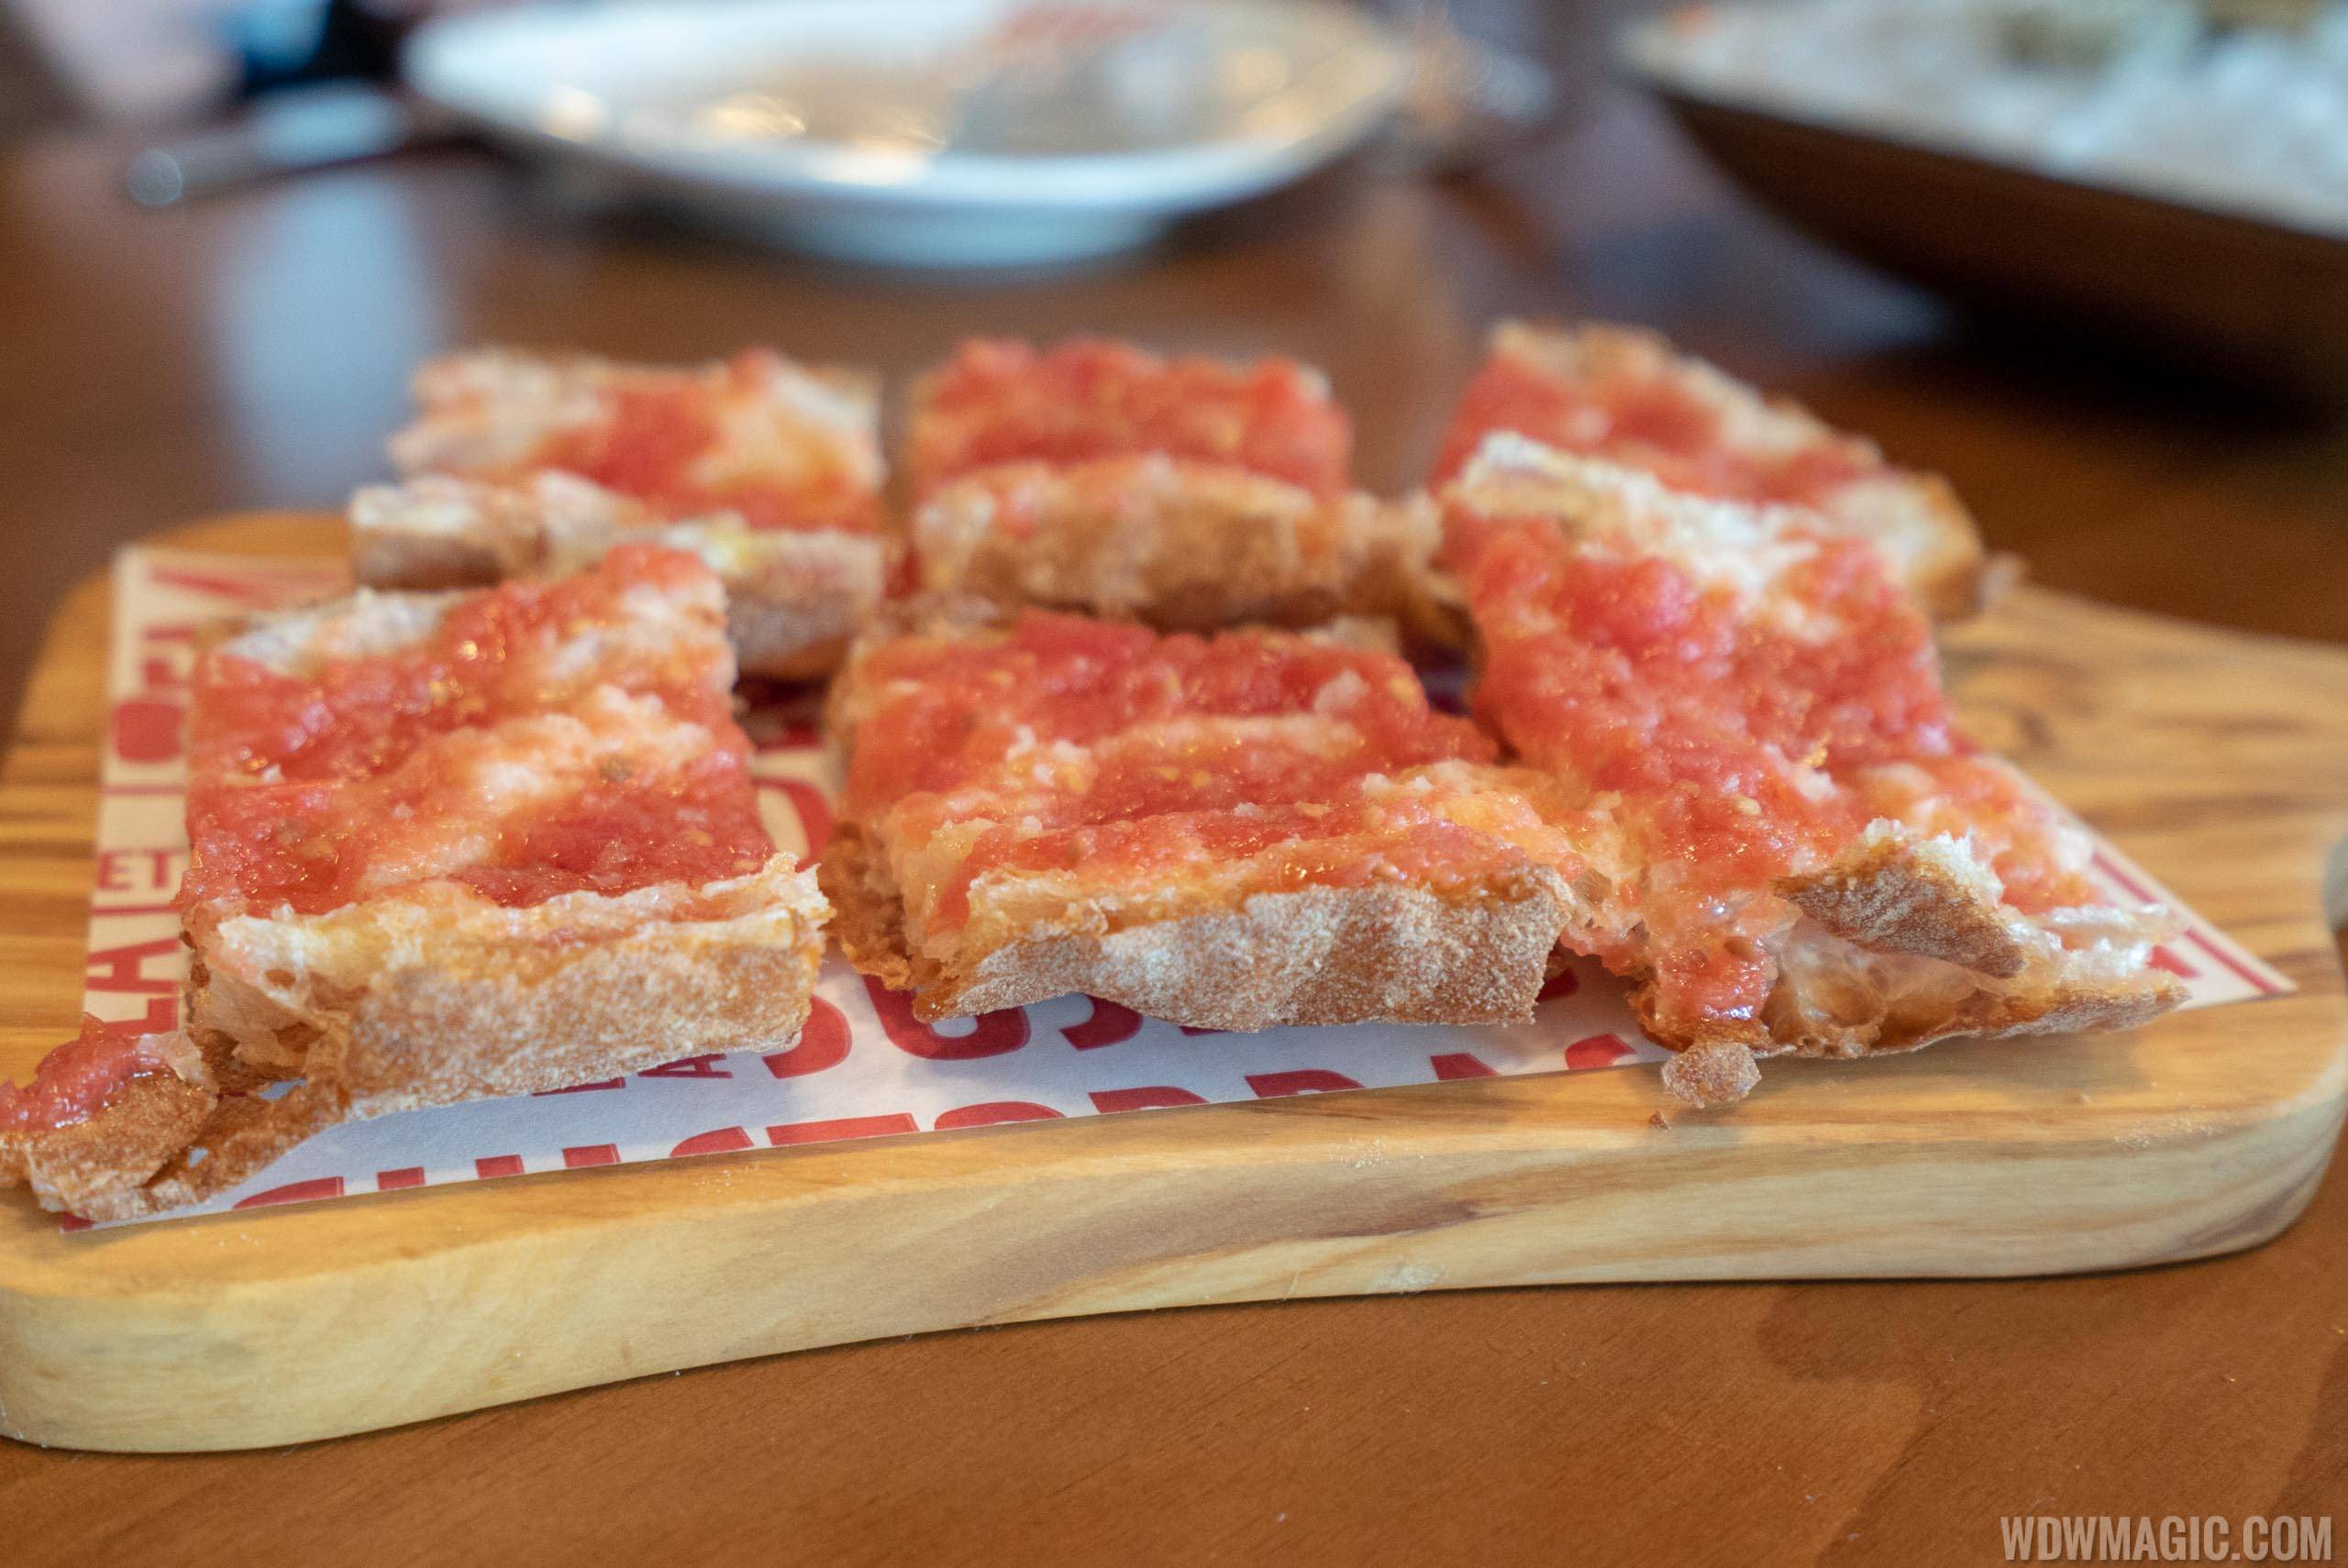 Chef's tasting menu: José's Way - Toasted slices of uniquely crispy and ethereal bread brushed with fresh tomato